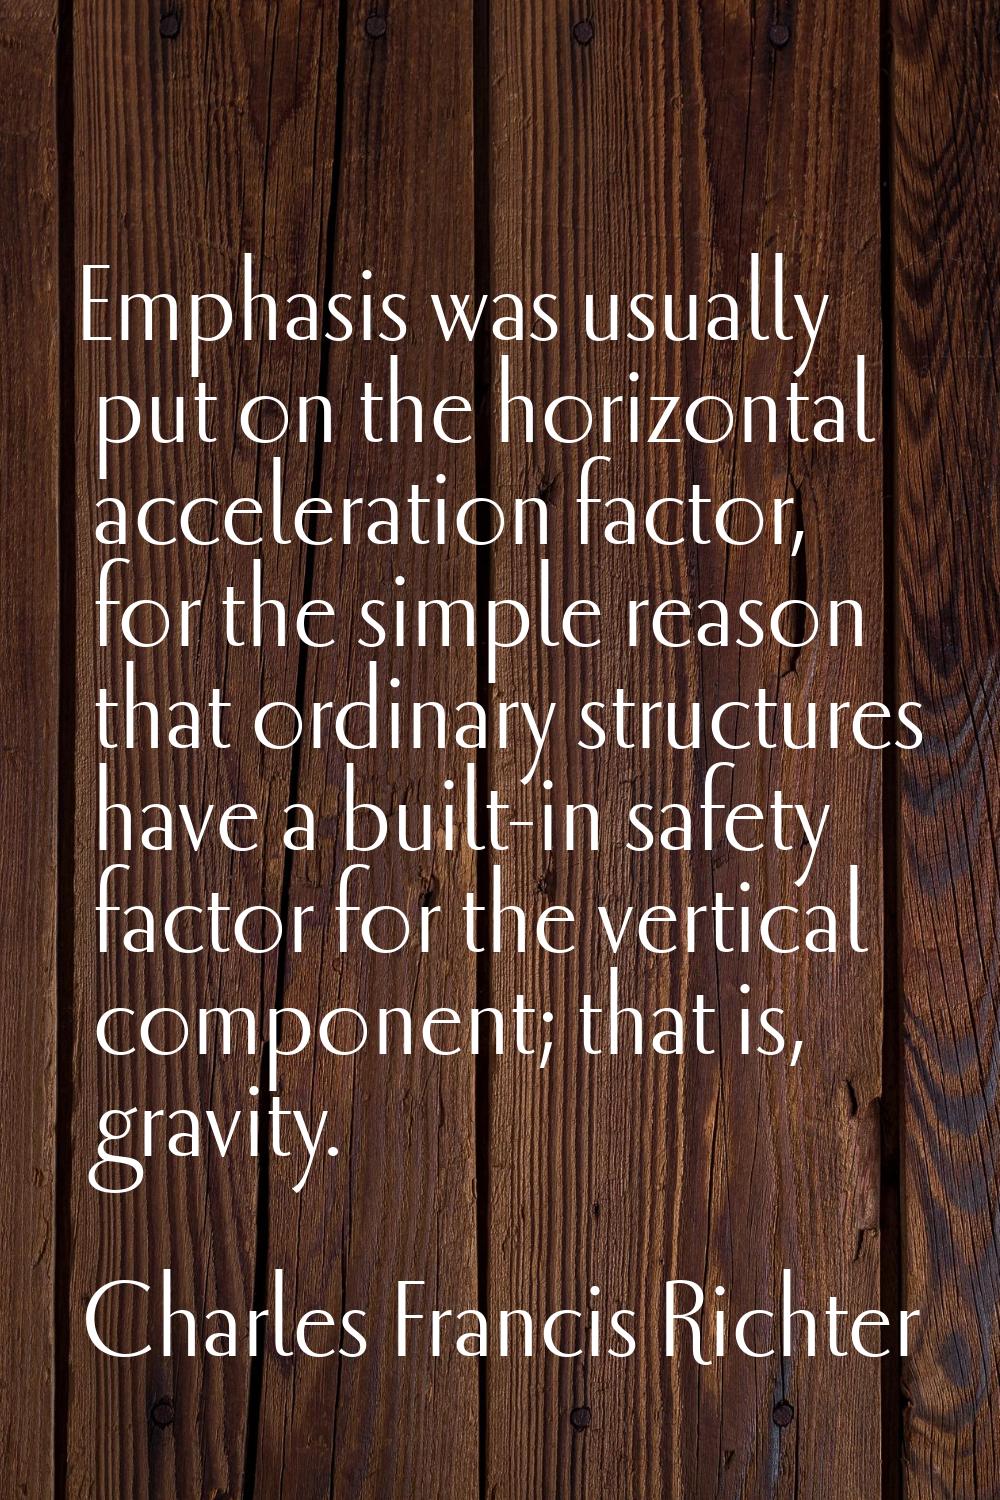 Emphasis was usually put on the horizontal acceleration factor, for the simple reason that ordinary